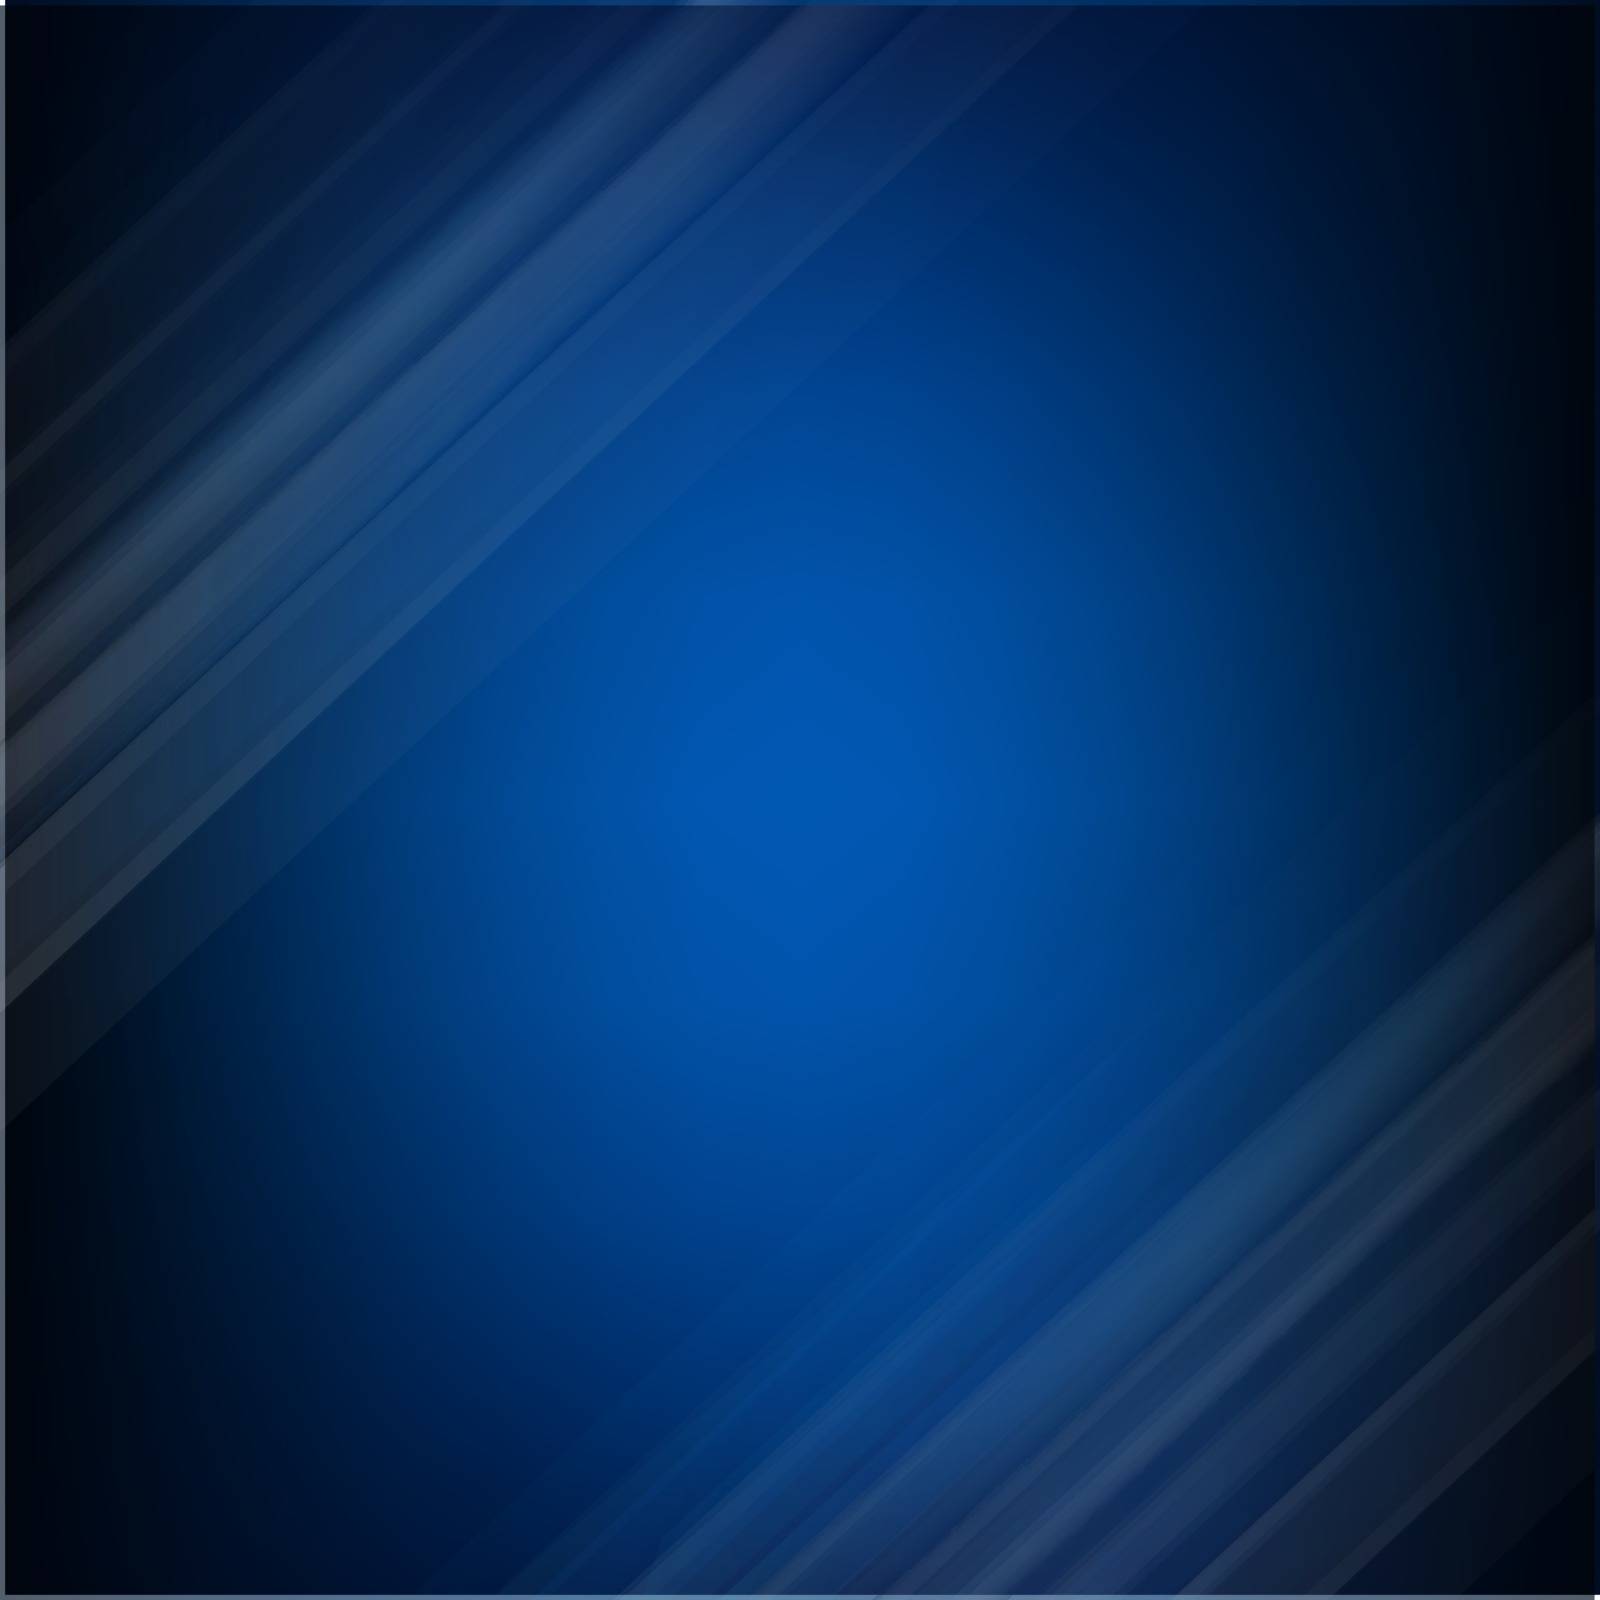 Dark Blue With Line With Gradient Mesh, Vector Illustration